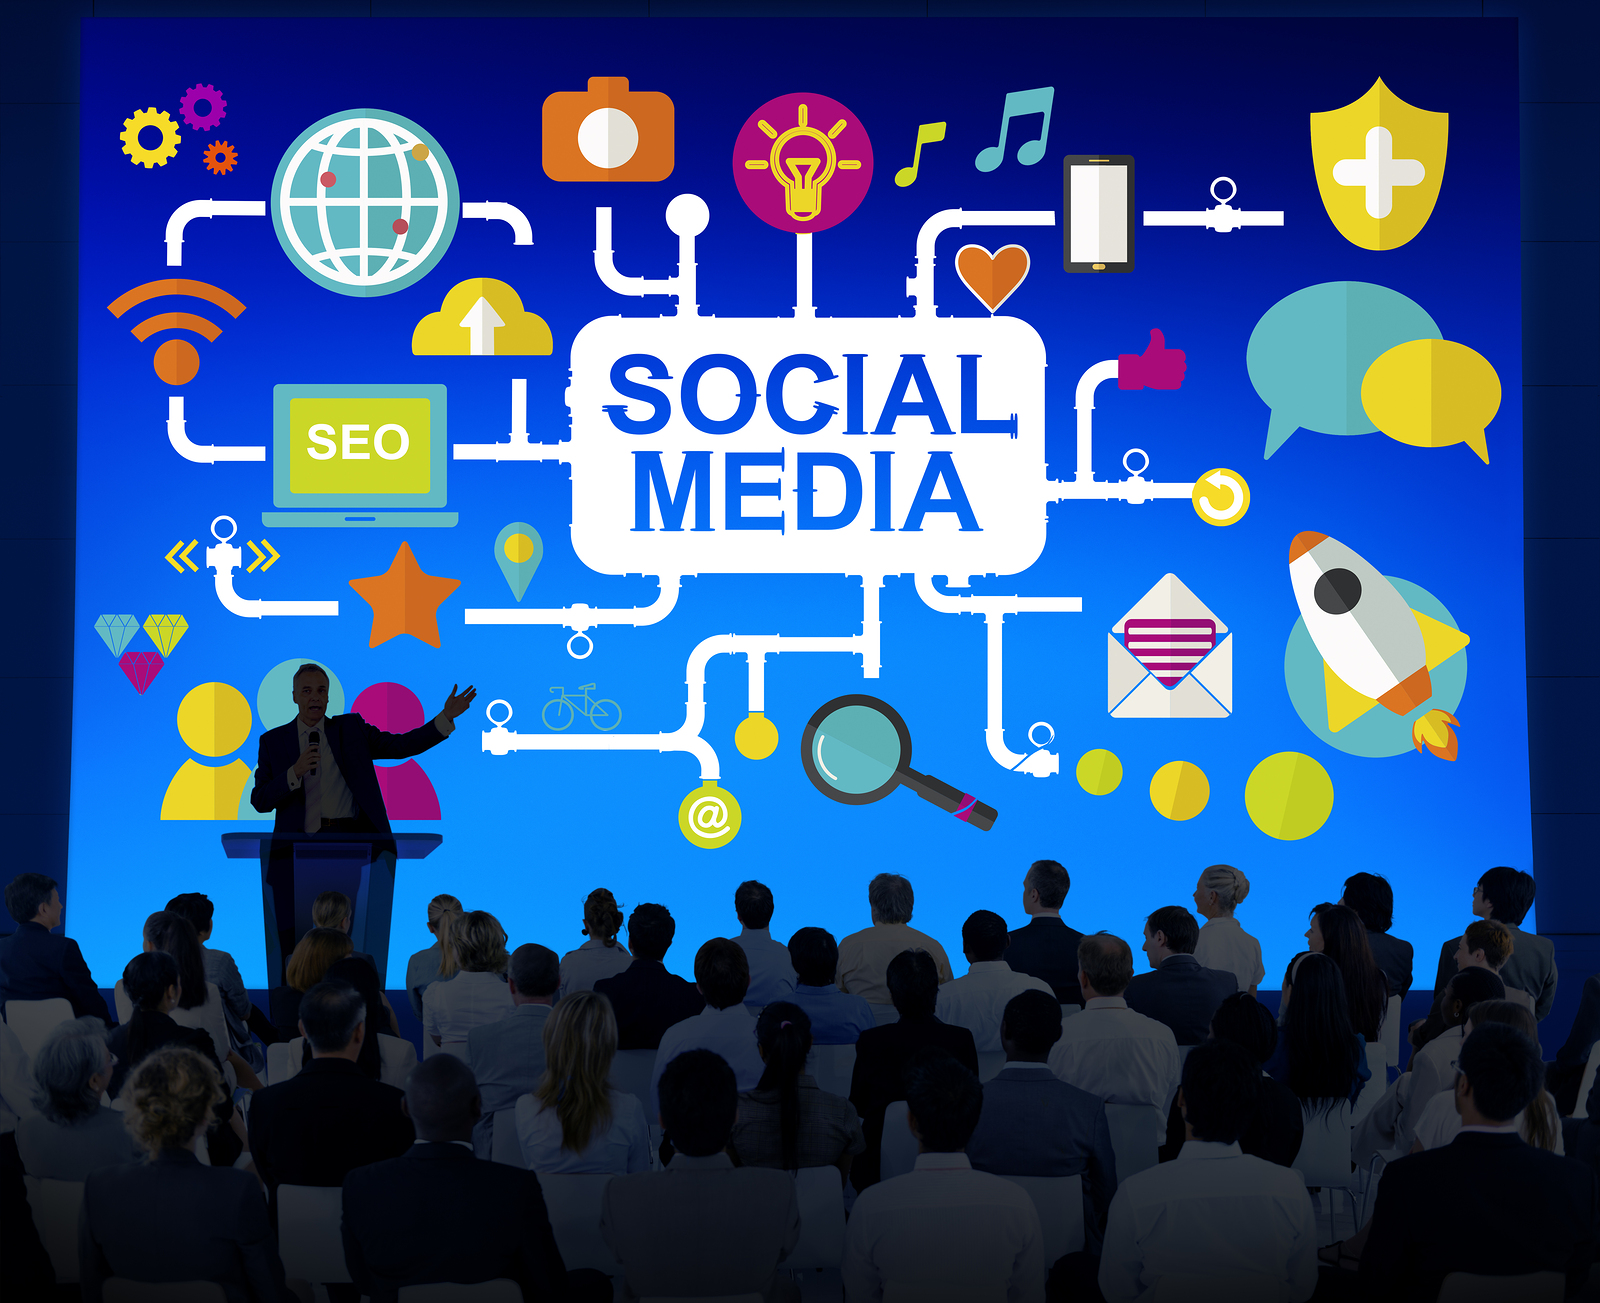 A Look at Social Media’s Role in Enhancing Business Value